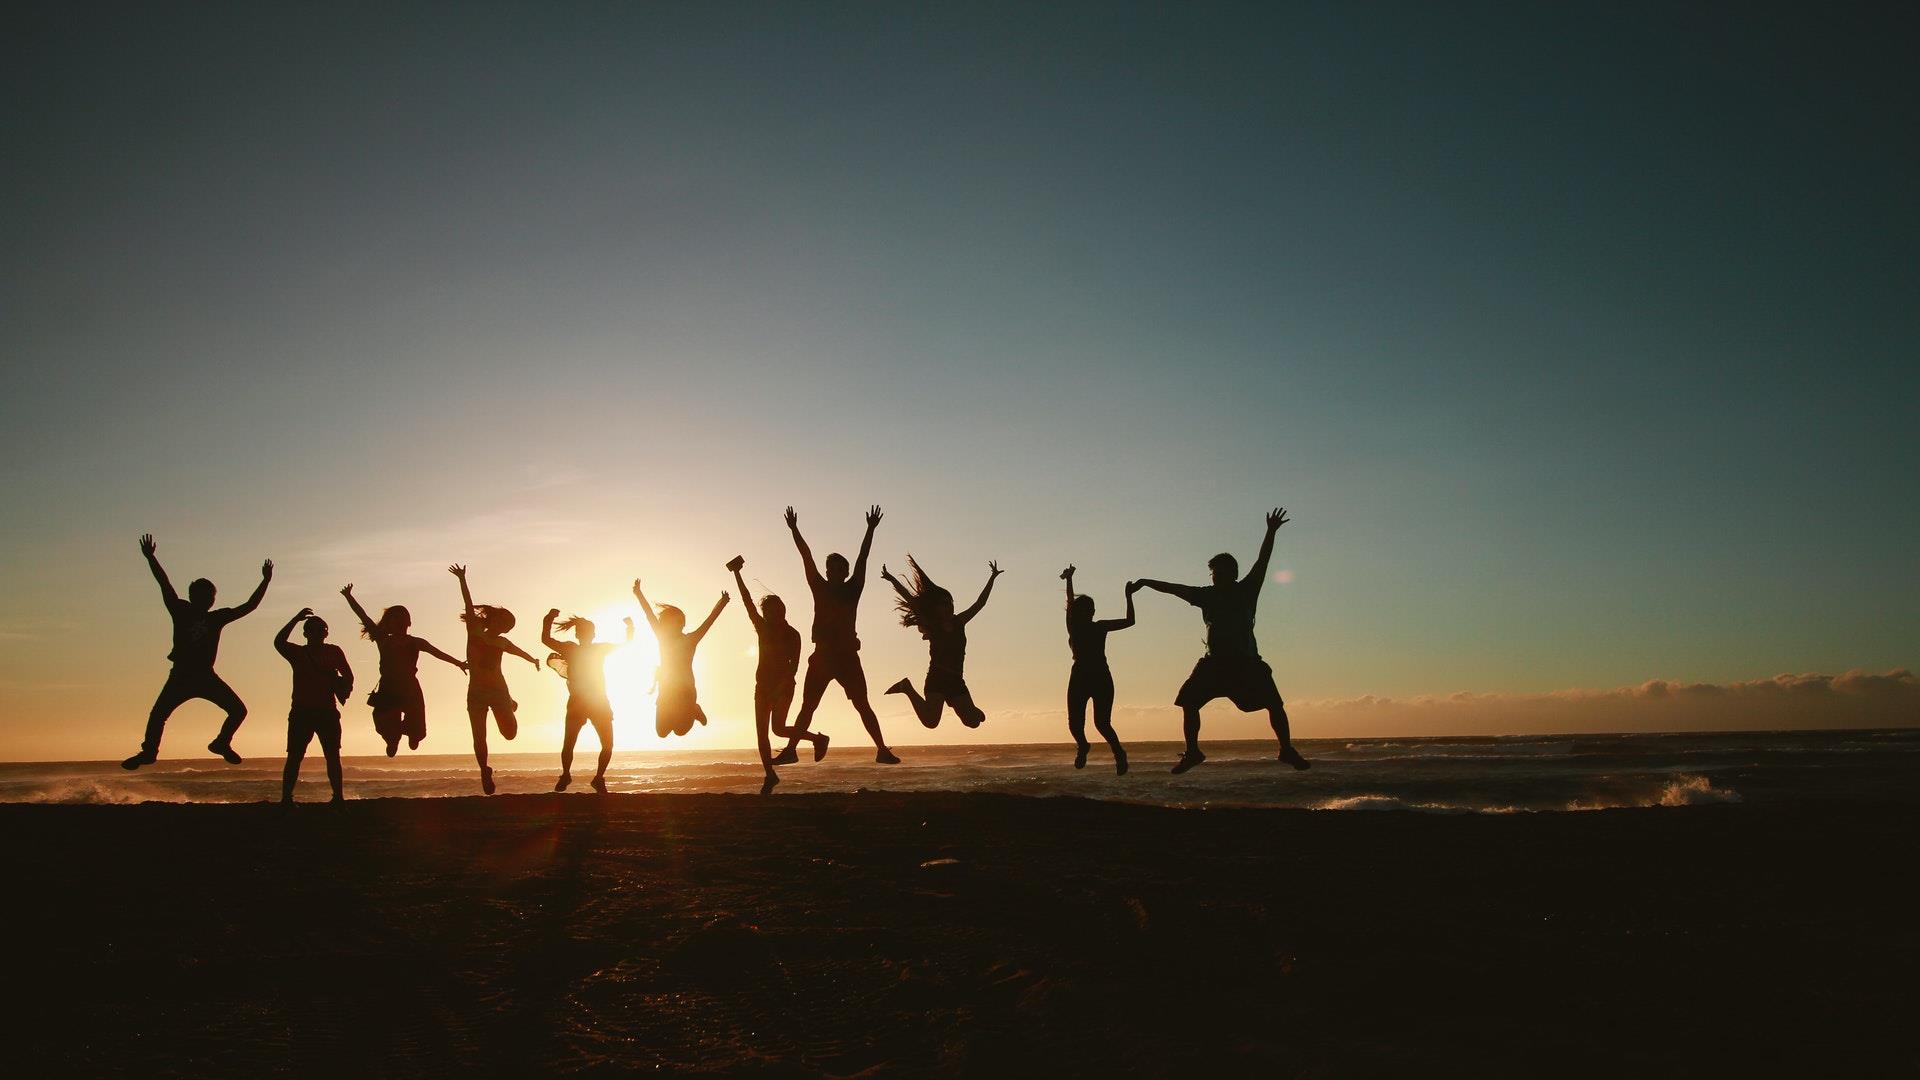 A silhouette of a group of friends jumping together on the beach